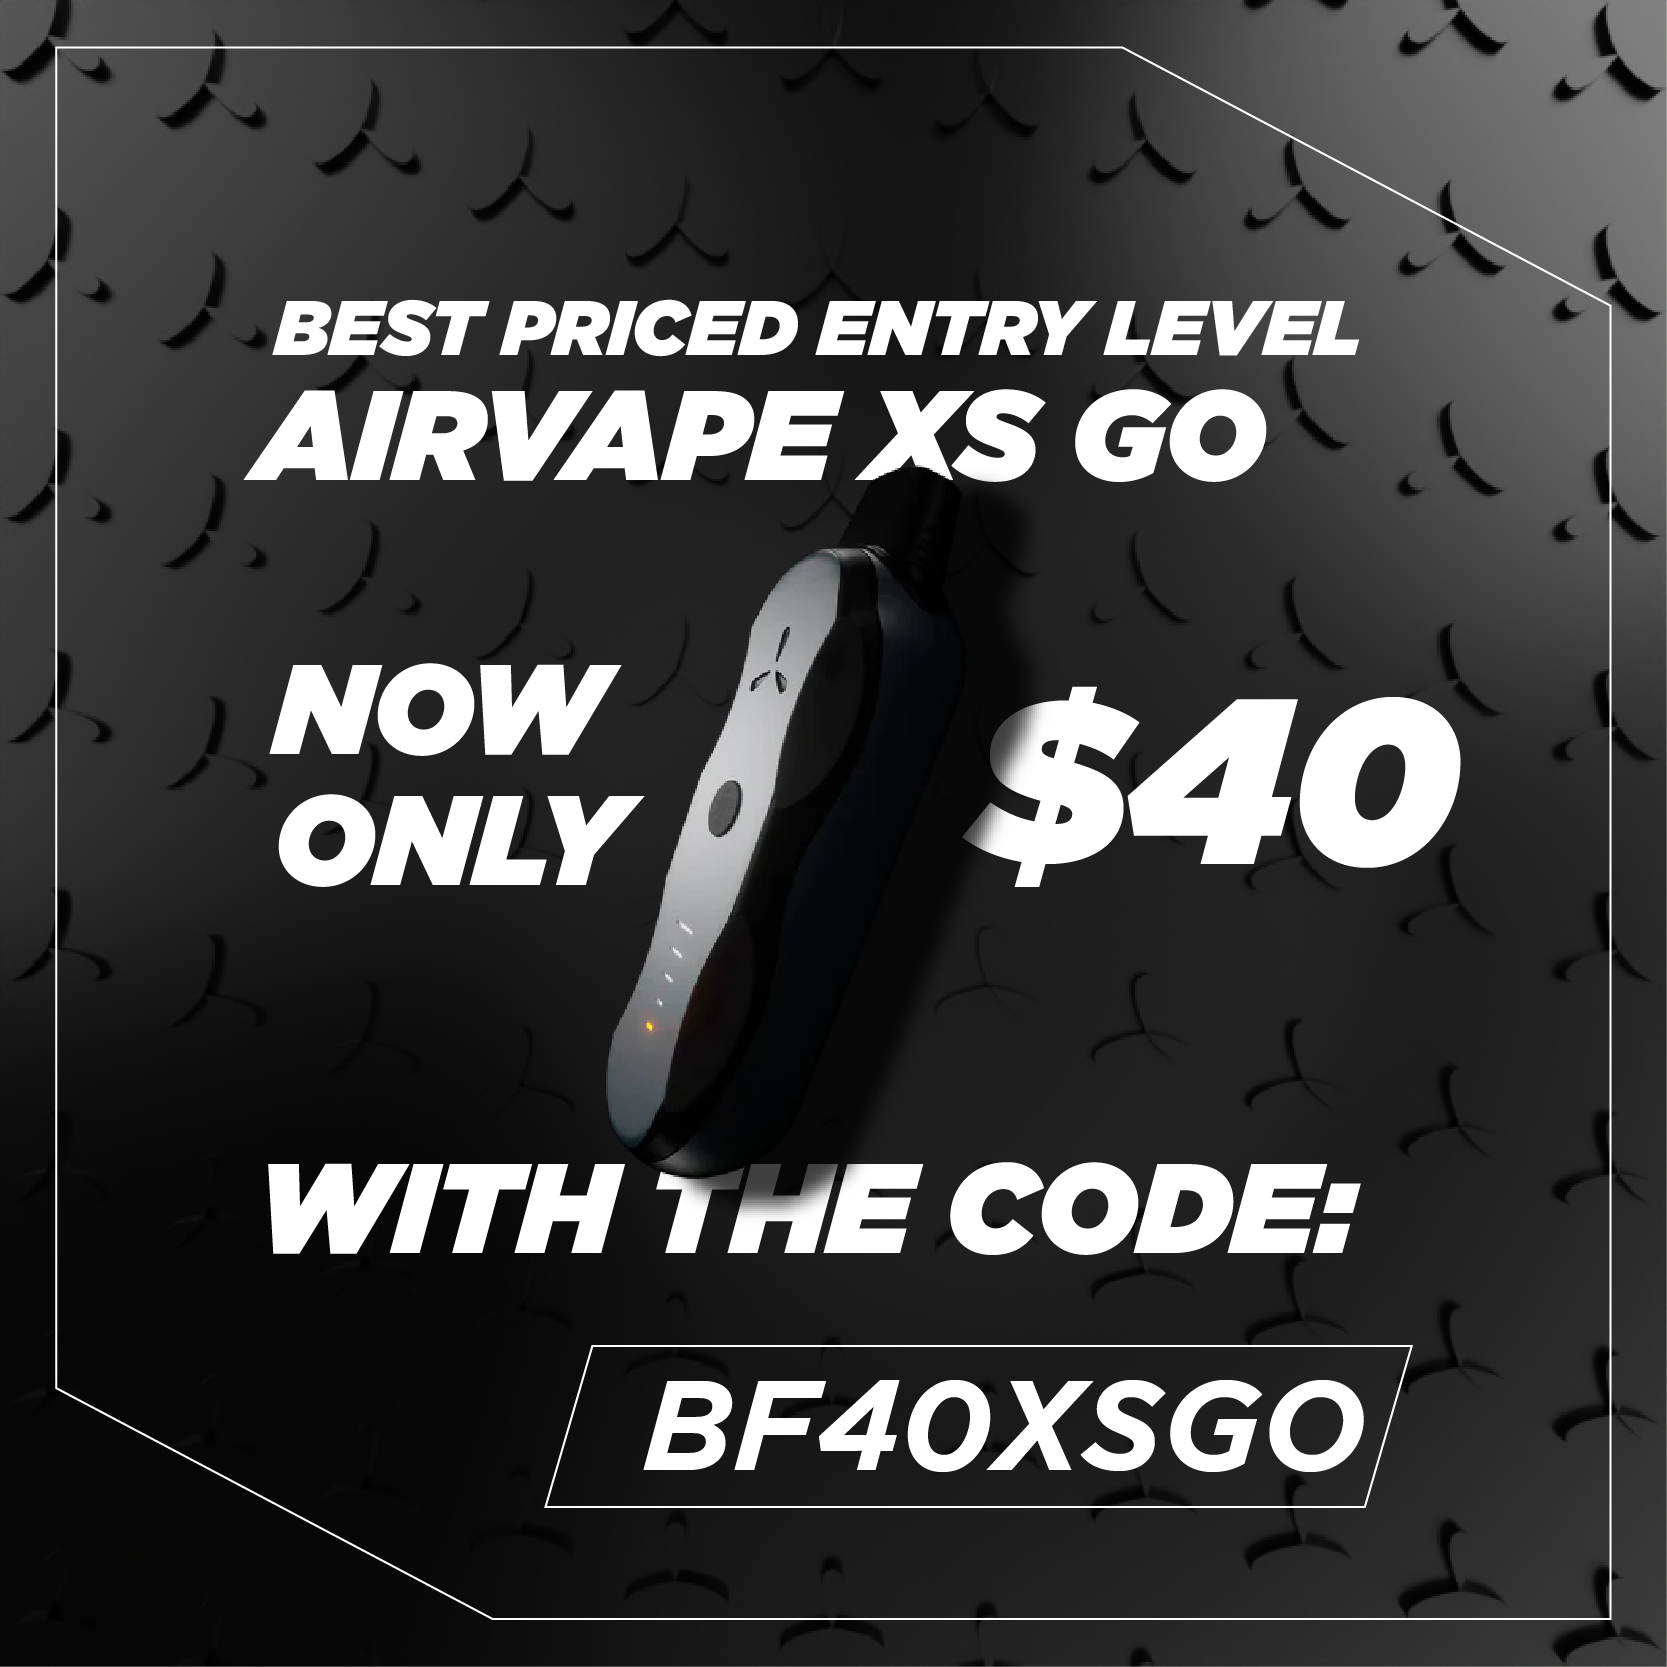 Get the best priced entry level vape, the XS GO Now only $40 with the code BF40XSGO